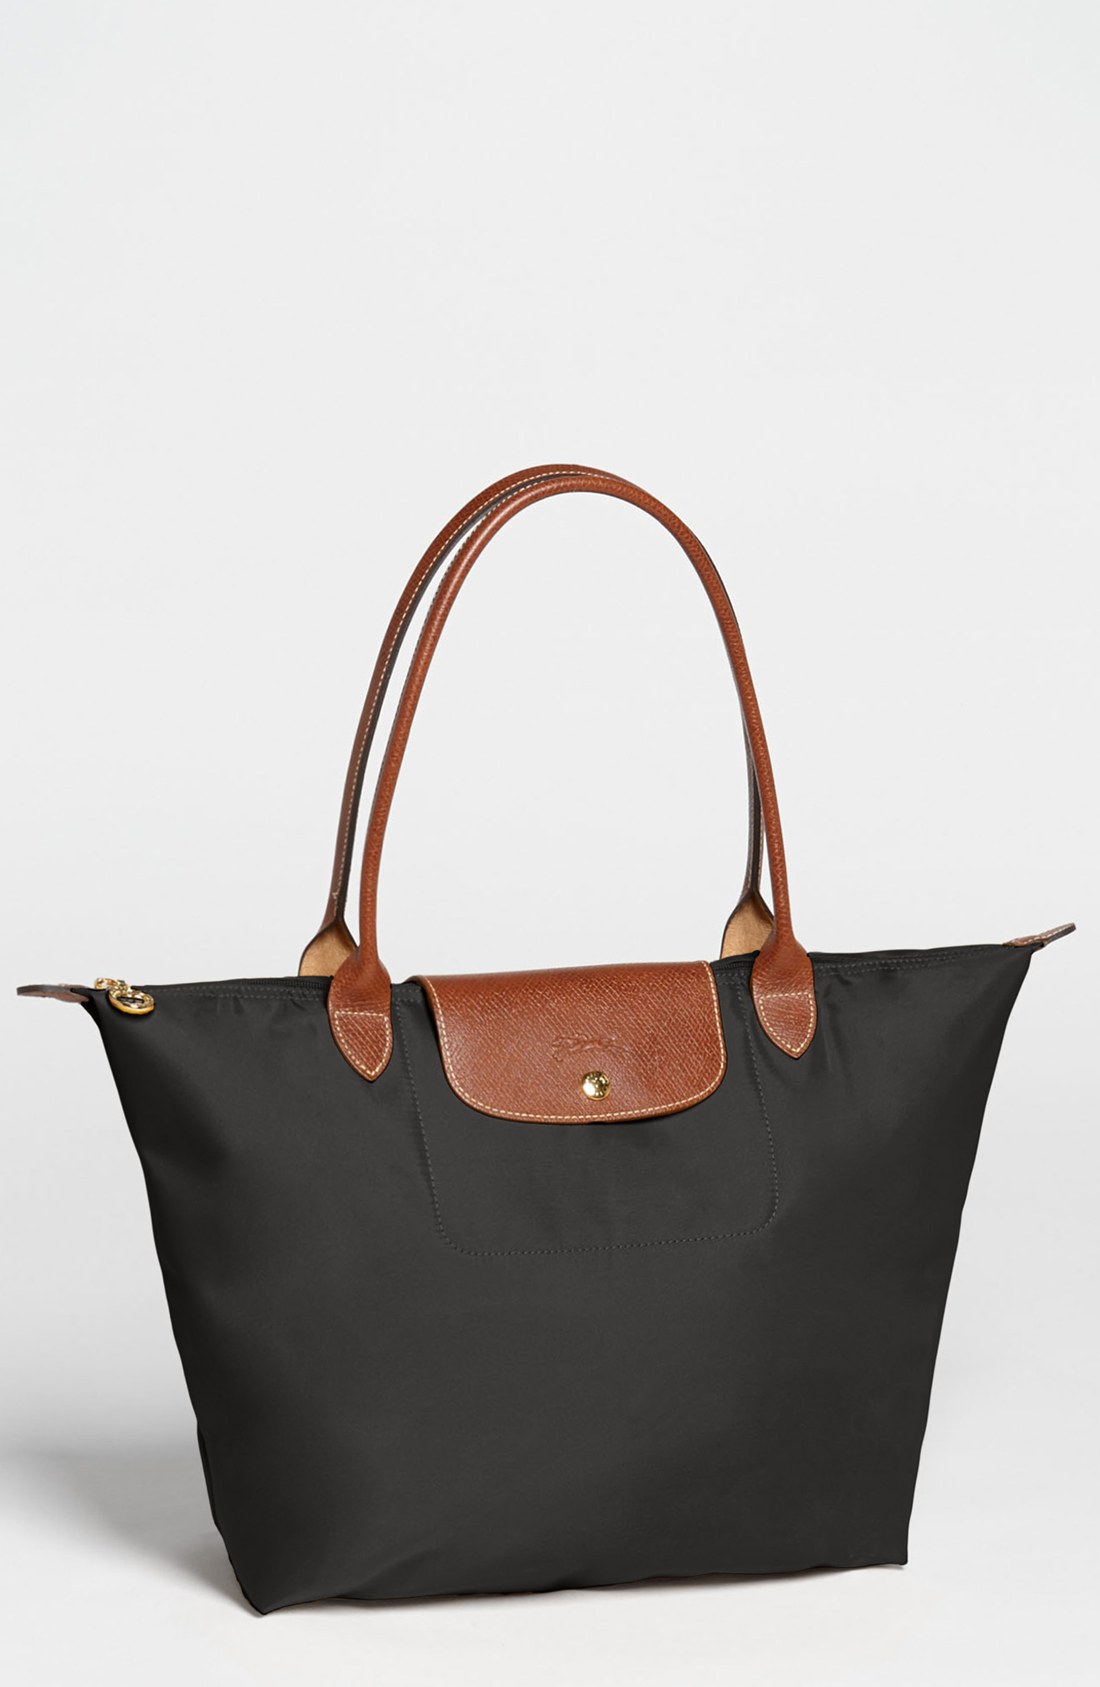 Longchamp Le Pliage Large Tote in Black | Lyst